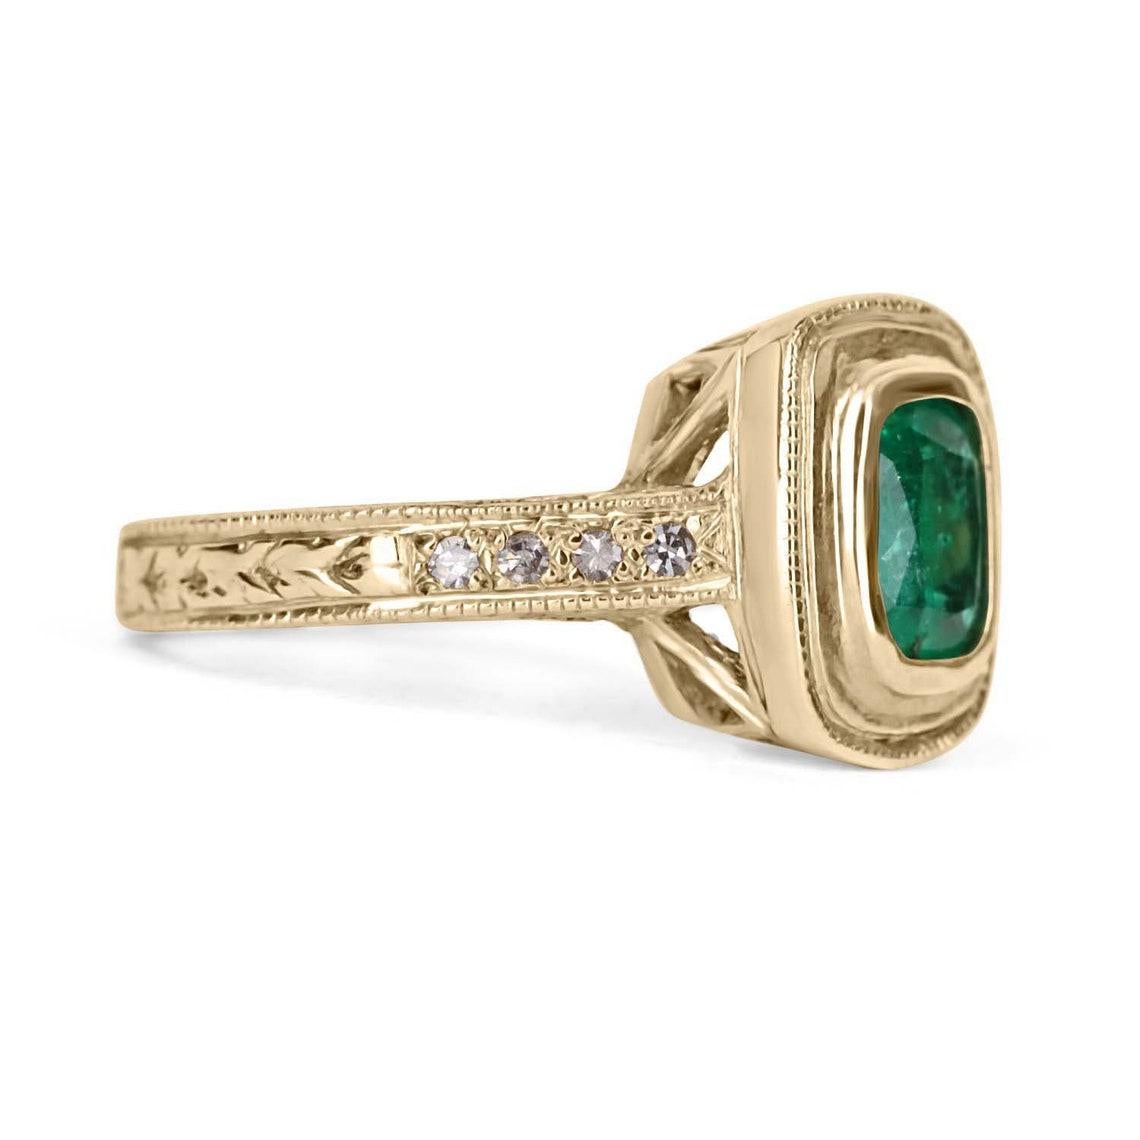 This is an exquisite, dark green Zambian natural cushion emerald and diamond ring. Set in luxurious in solid 14k yellow gold, the approx 1.60-carat rich green emerald is bezel set. Skillfully handcrafted, the center gemstone sits in a gorgeous